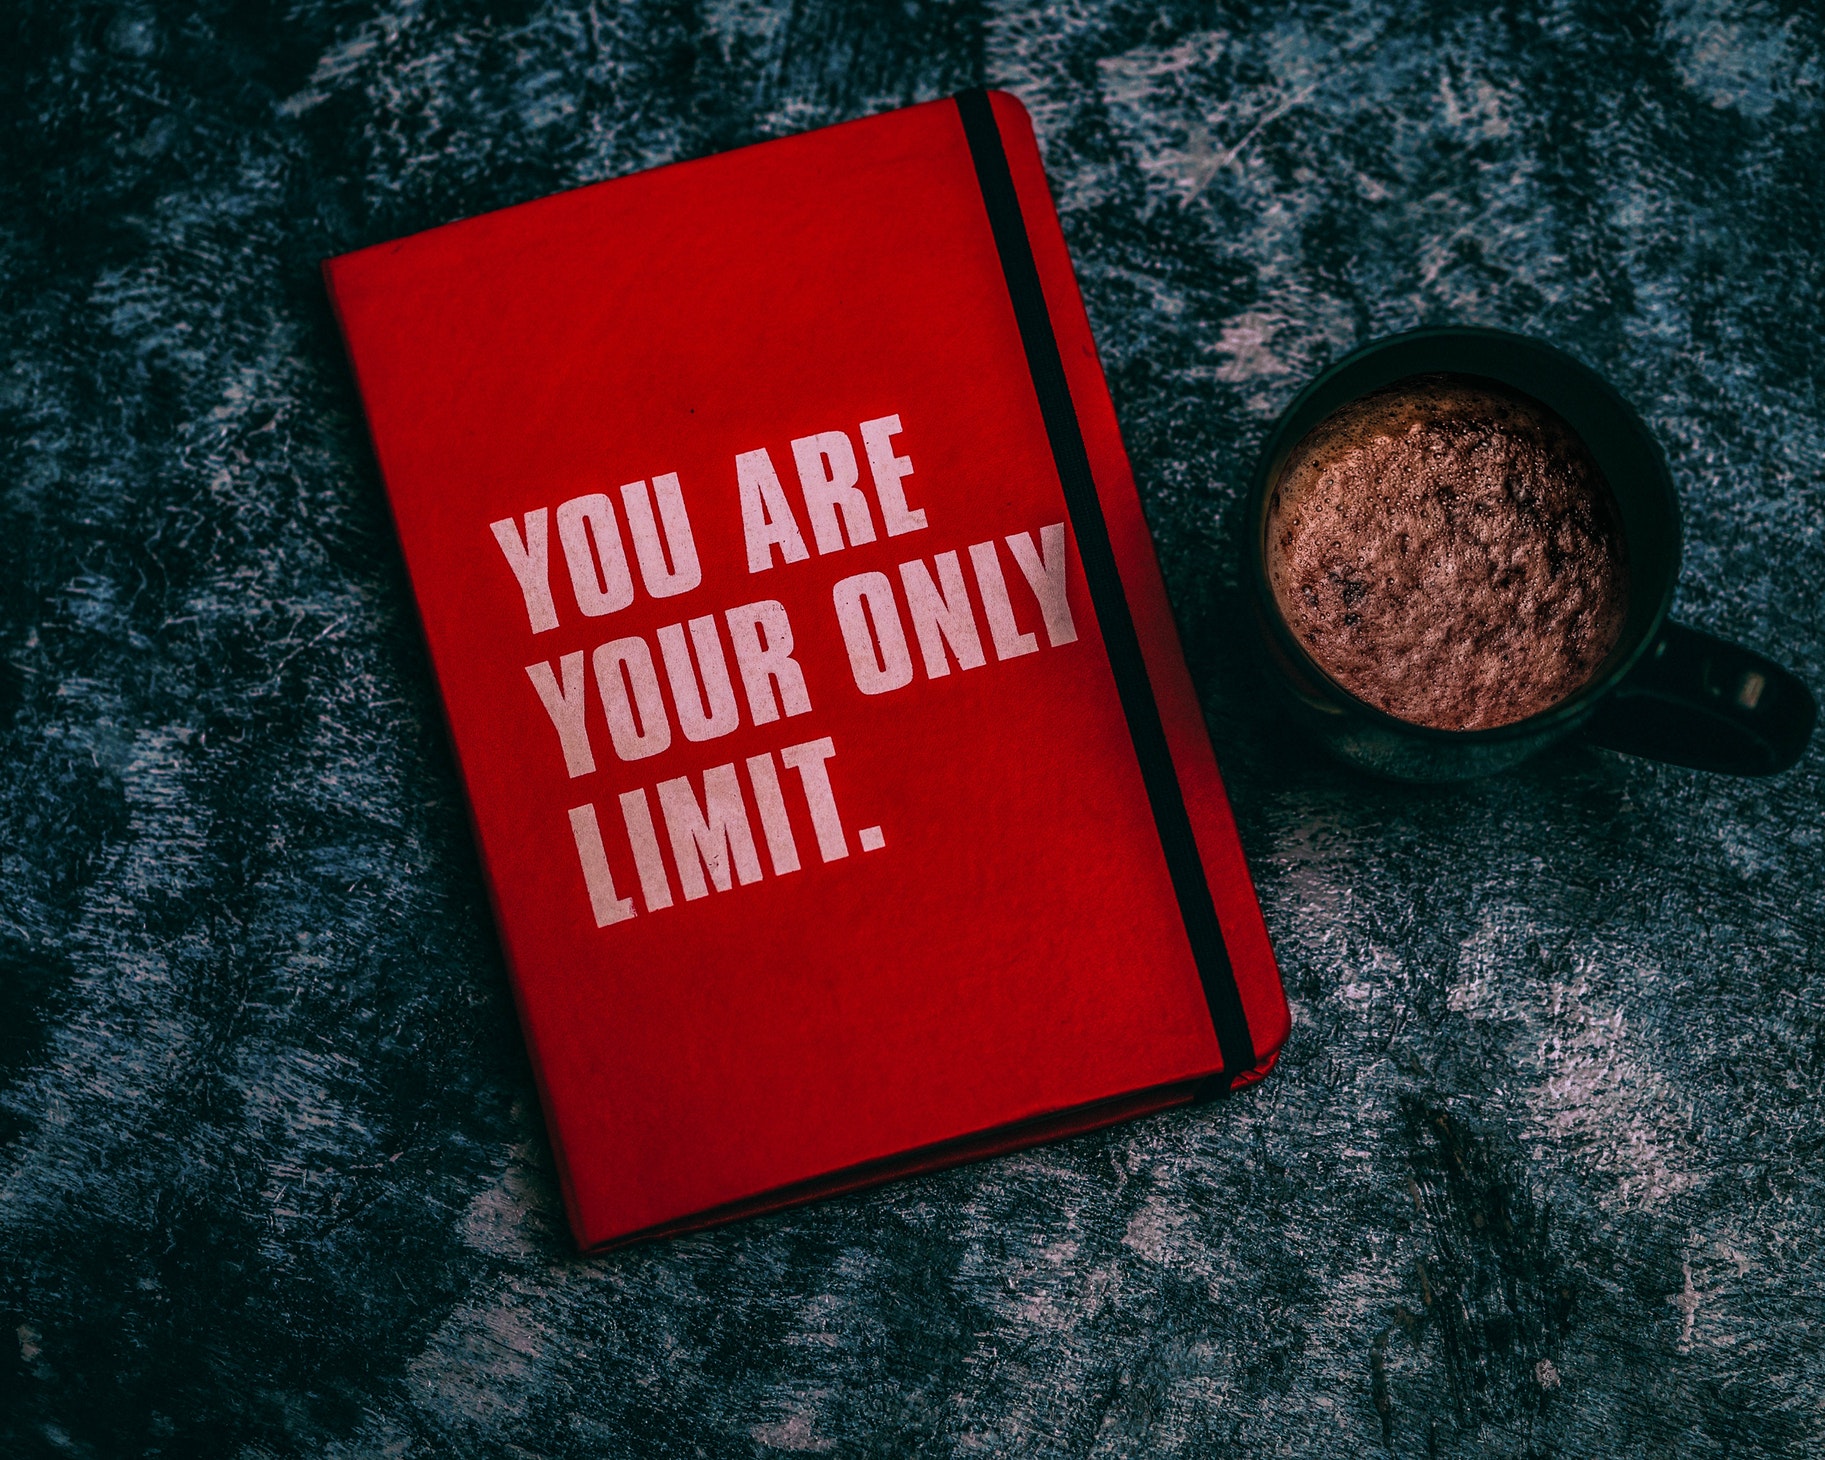 You are YOur oNly limit.jpg